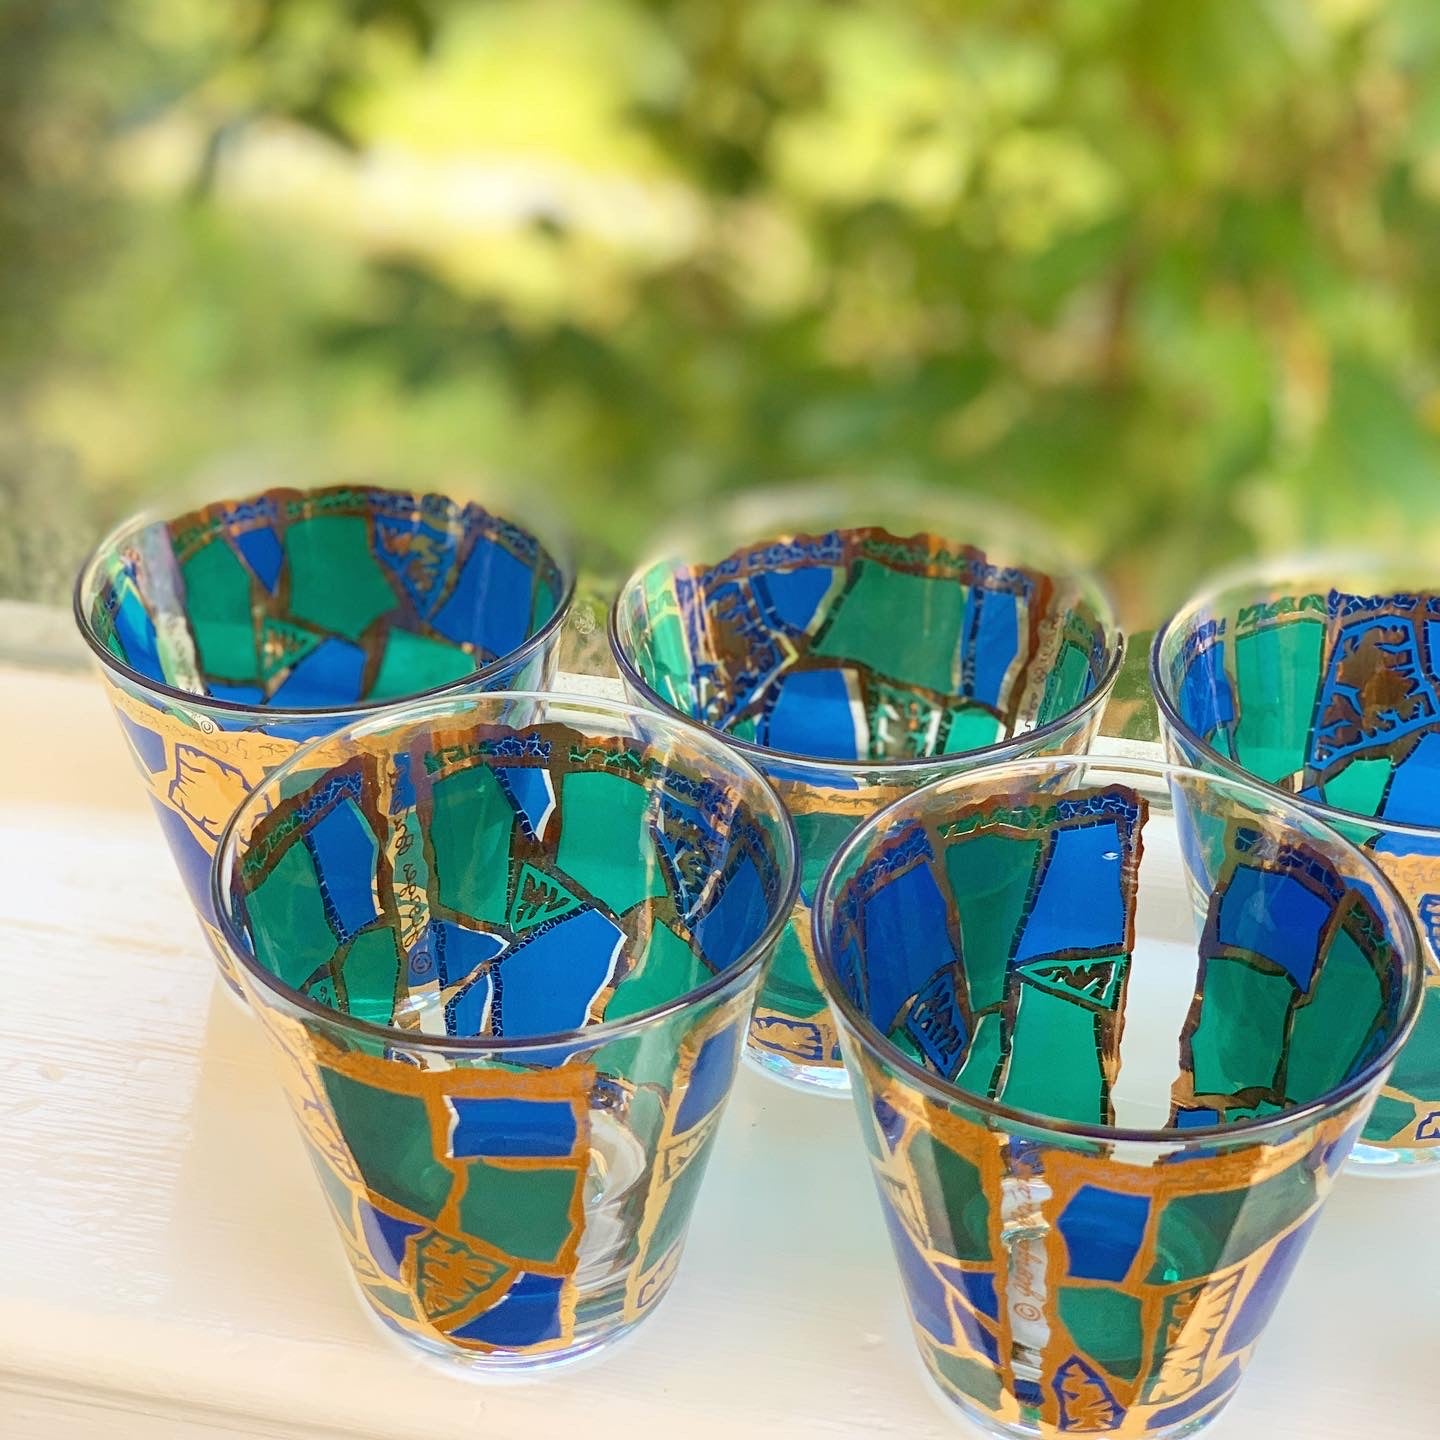 22K Gold Mosaic or Stained Glass Lowball Glasses (Set of 6)